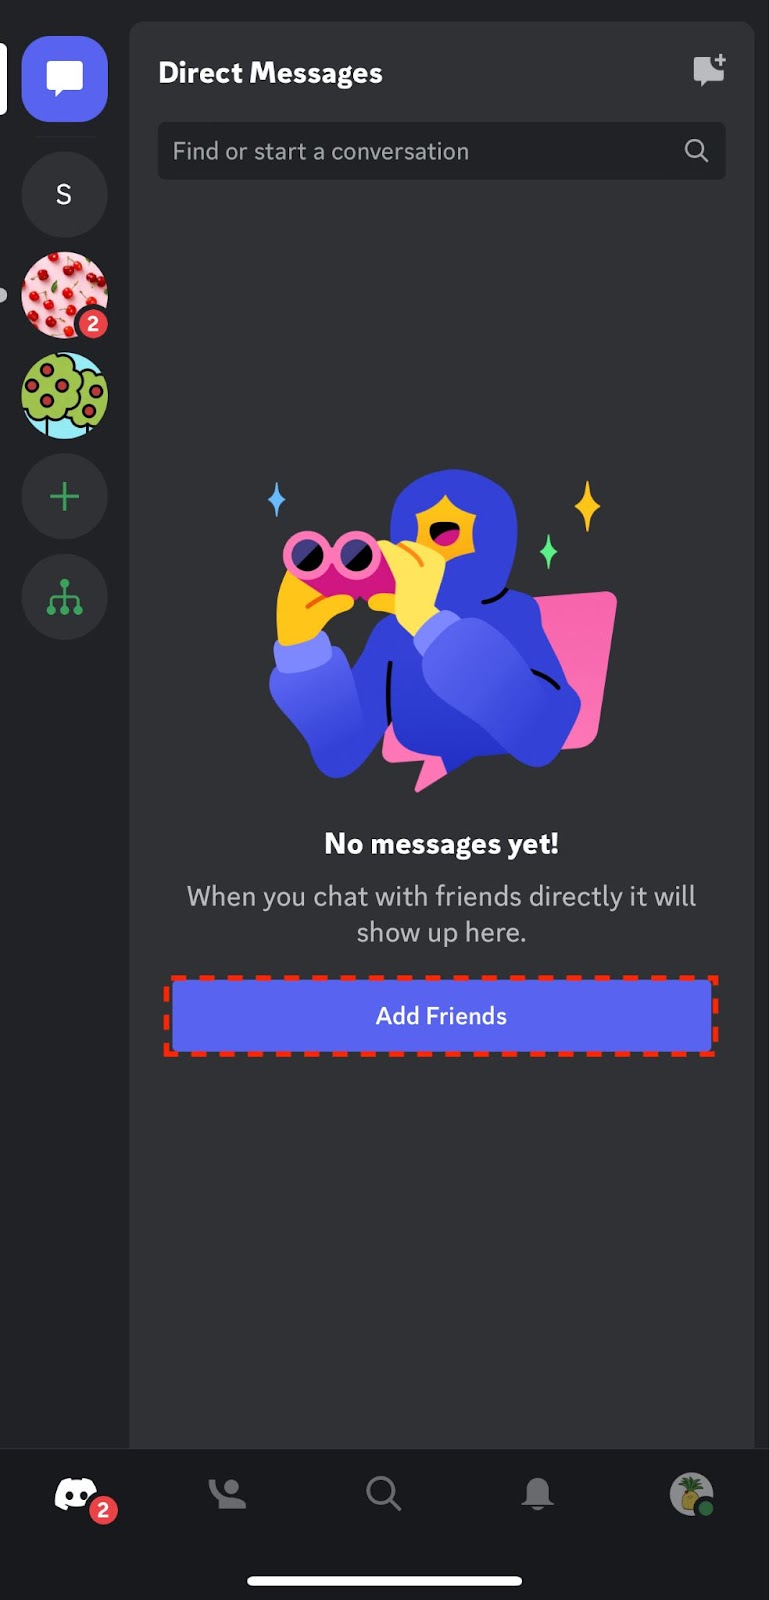 Call of Duty: Mobile Discord on X: Steps to participate in the